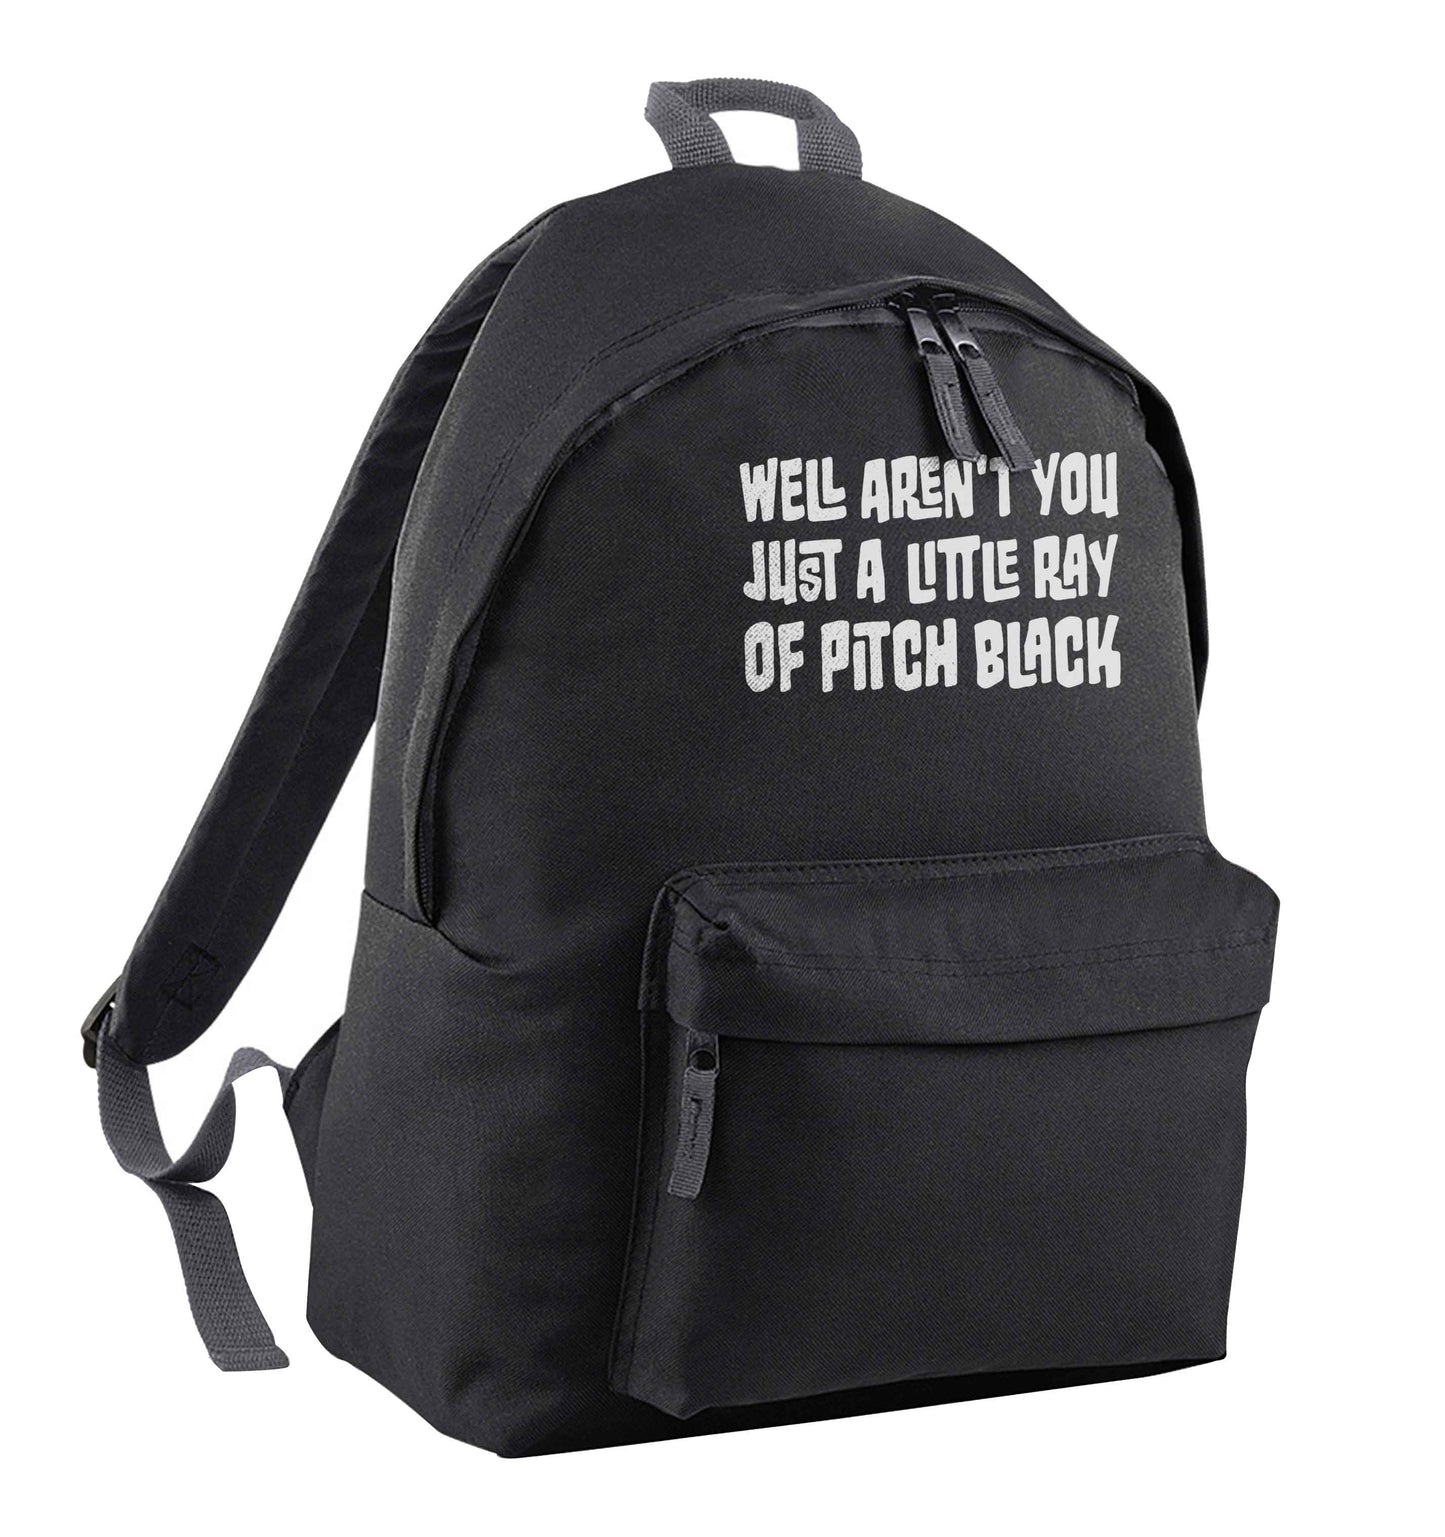 Well aren't you just a little ray of pitch black Kit black children's backpack